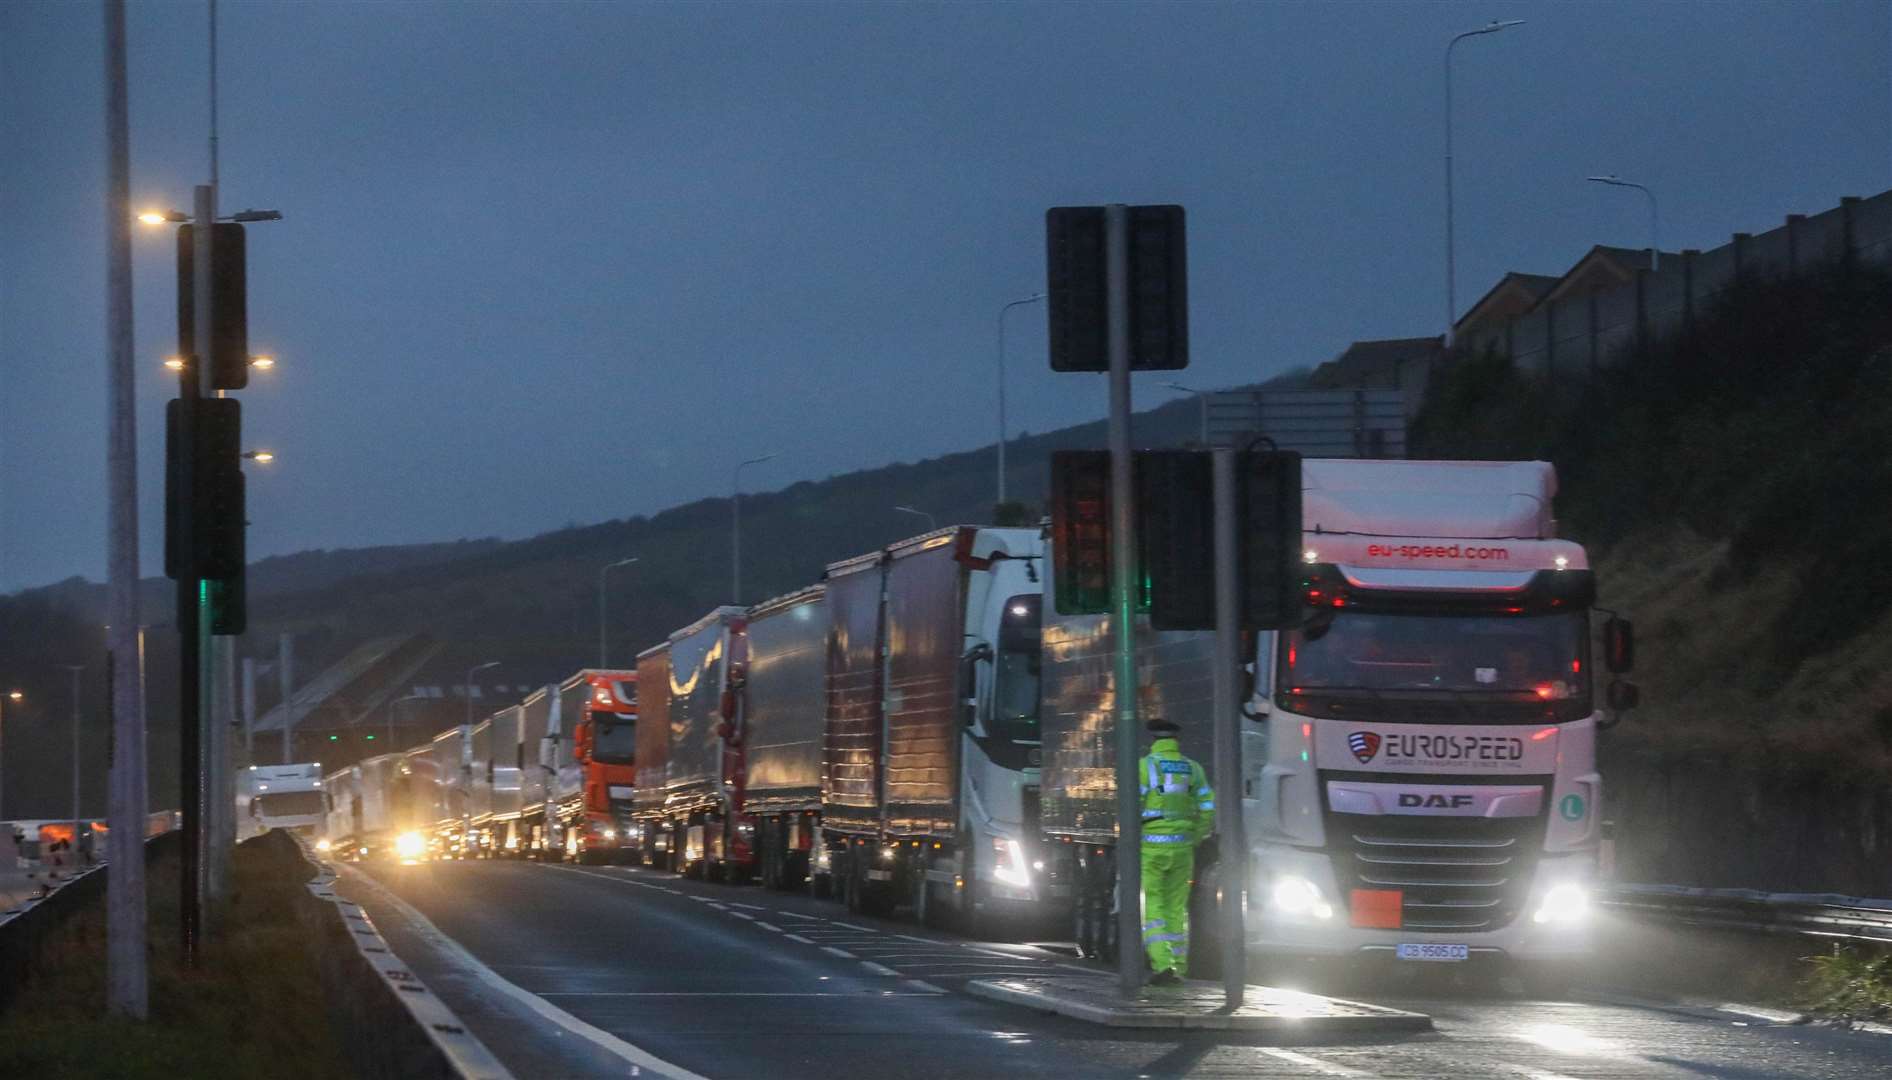 There are long delays at the Port where strong gale force winds are present. Photo: UK News in Pictures